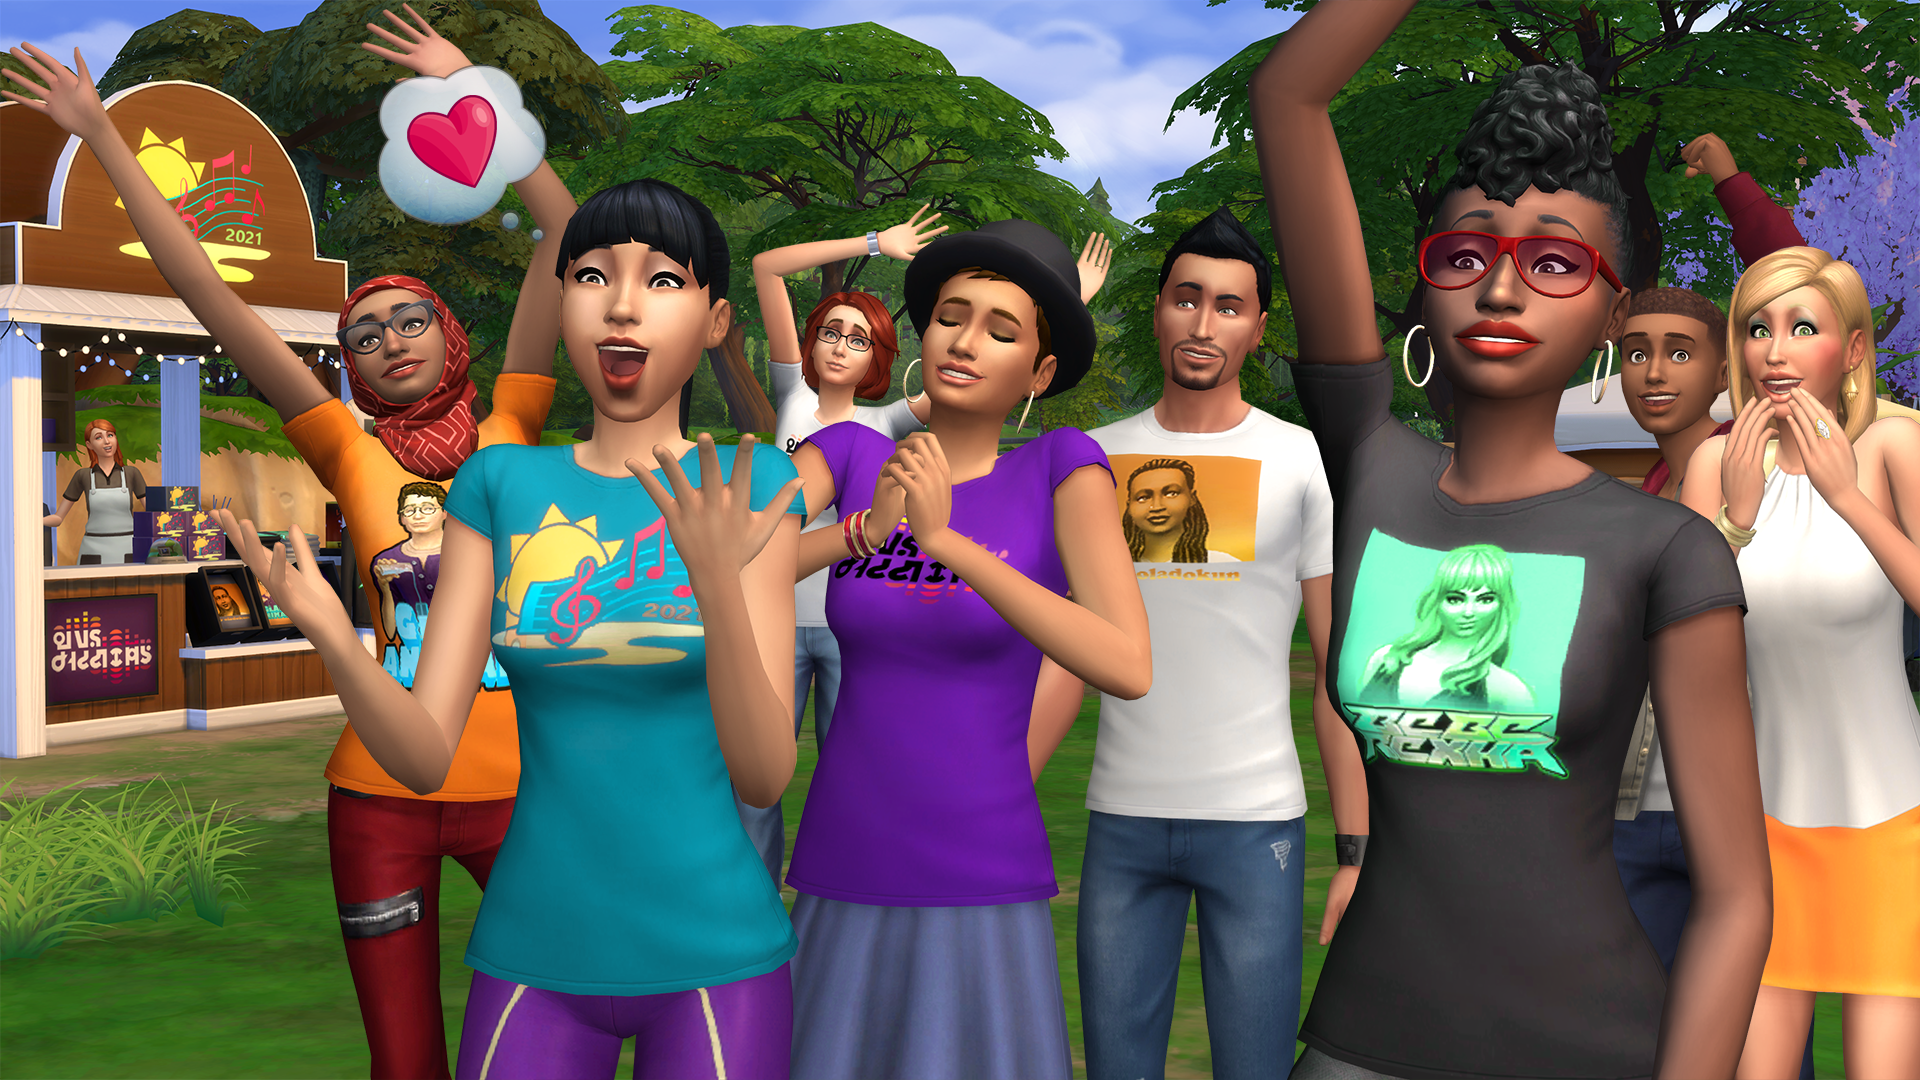 Trick to learn all the skills quickly in The Sims 4